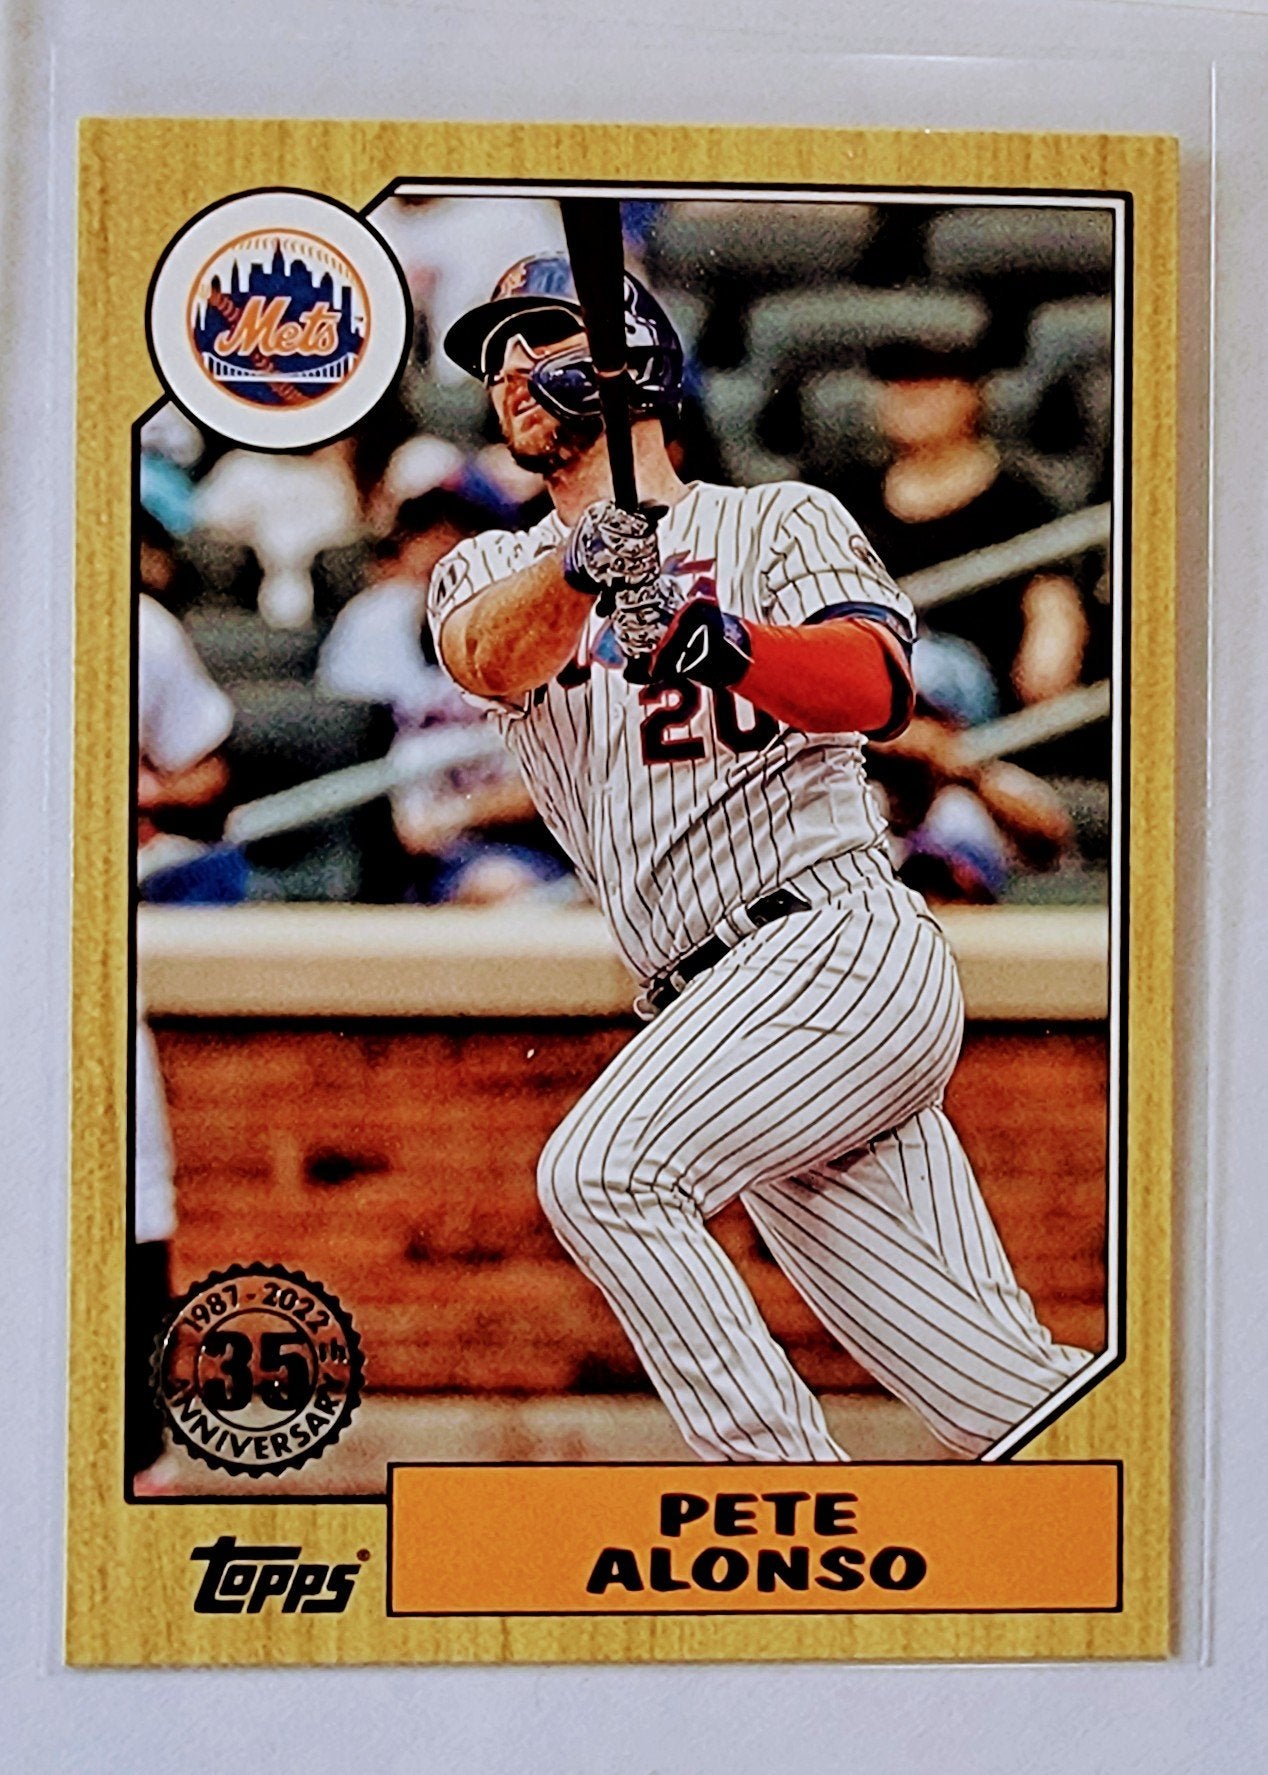 2022 Topps Pete Alonso 1987 35th Anniversary Insert Baseball Card AVM1 simple Xclusive Collectibles   